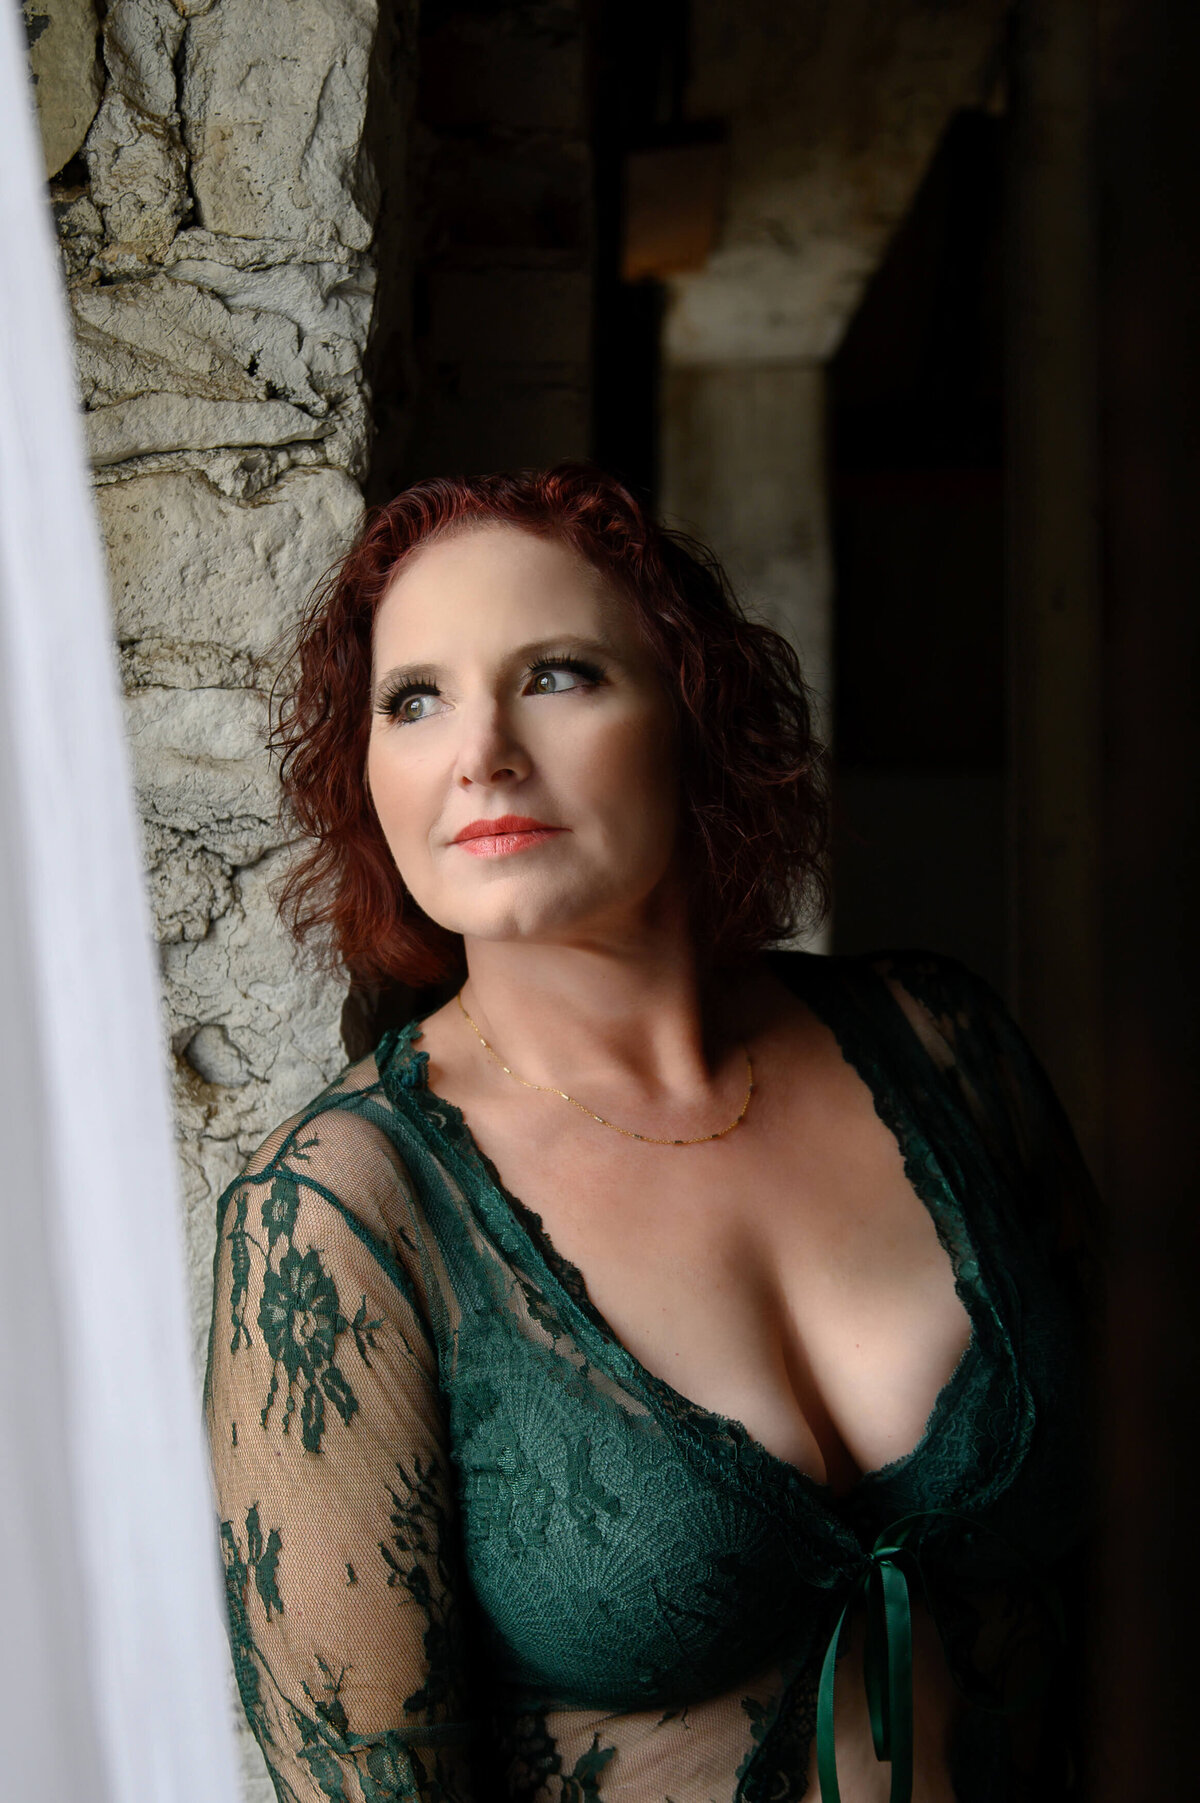 Red haired woman in green bra leaning against a brick wall looking out the window for her Mississauga Boudoir Photography session